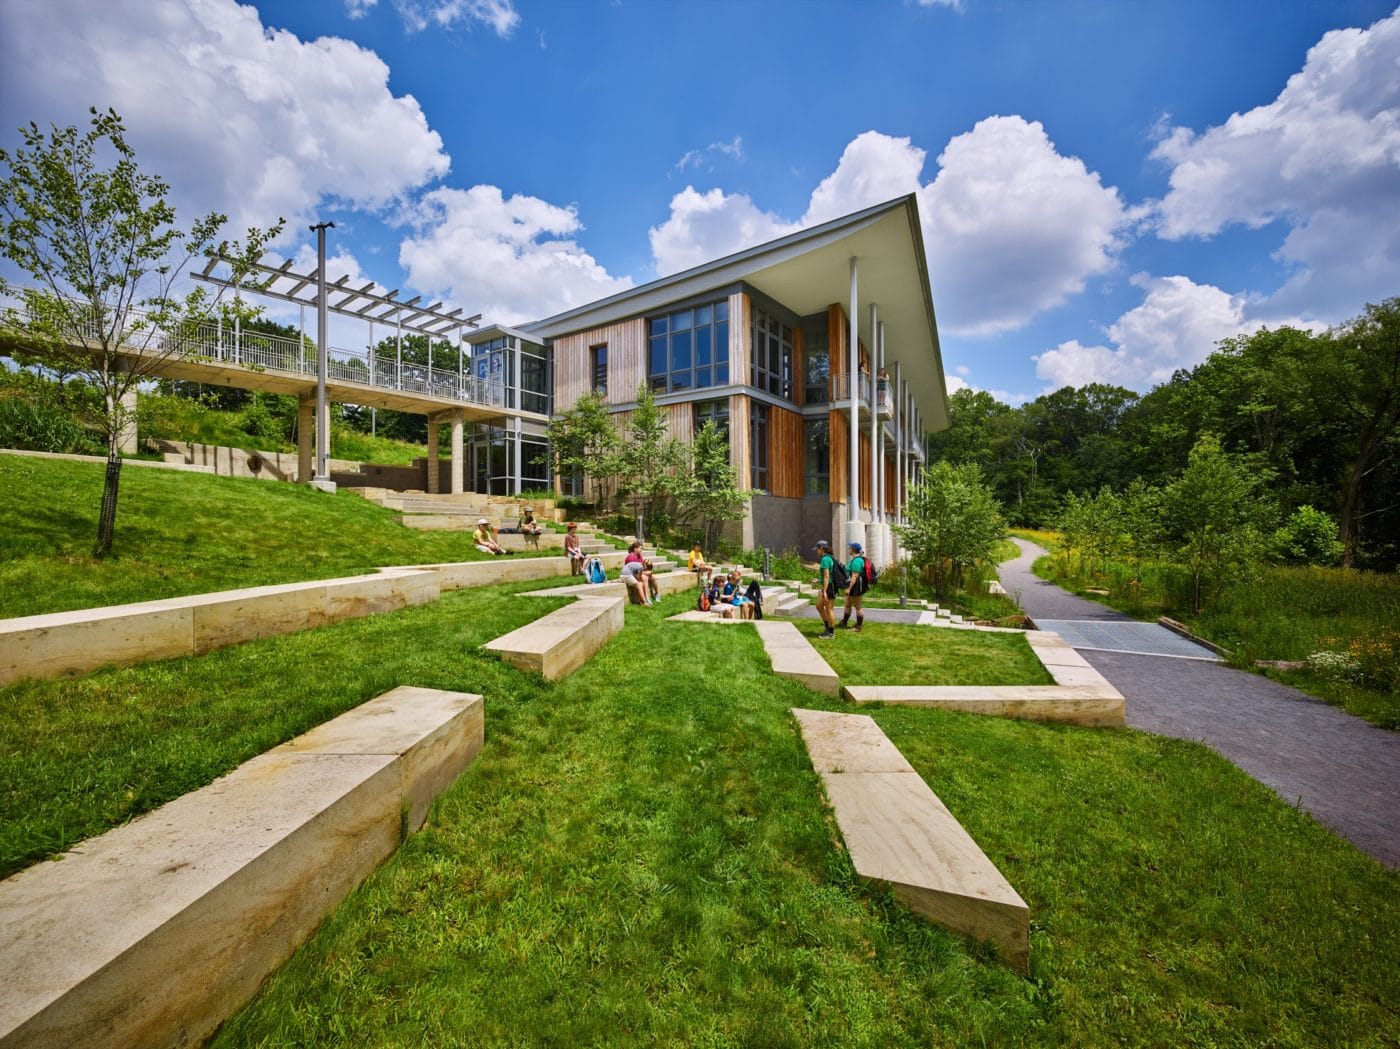 The Frick Environmental Center, one of the world’s most sustainable buildings